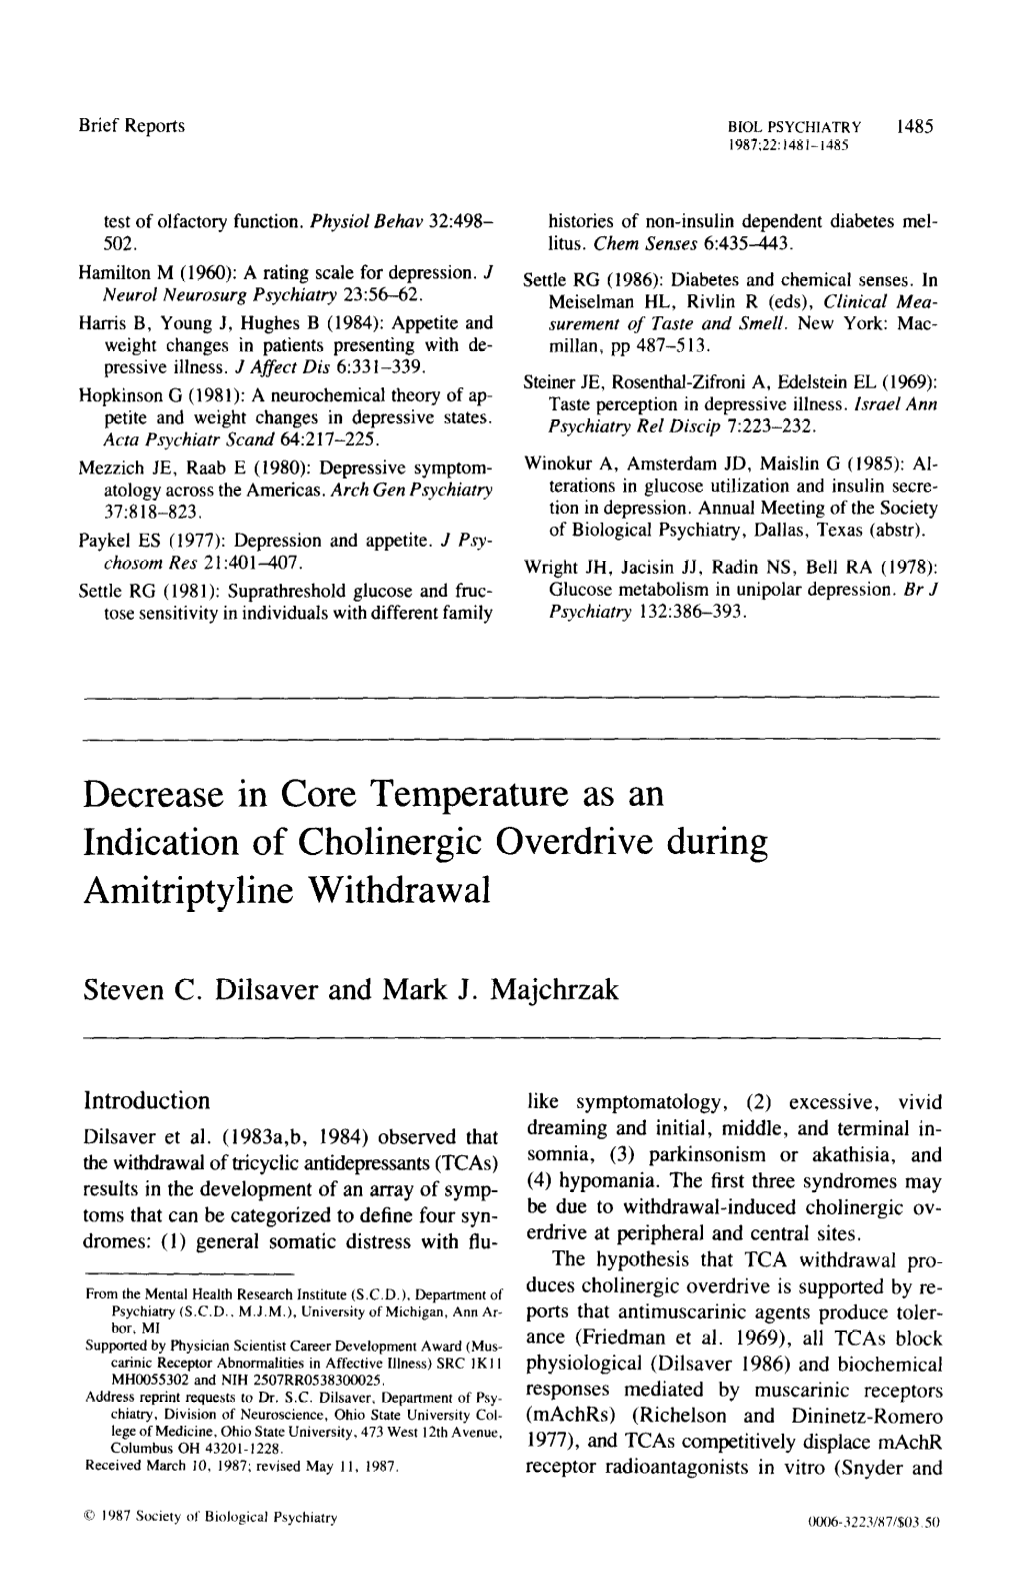 Decrease in Core Temperature As an Indication of Cholinergic Overdrive During Amitriptyline Withdrawal